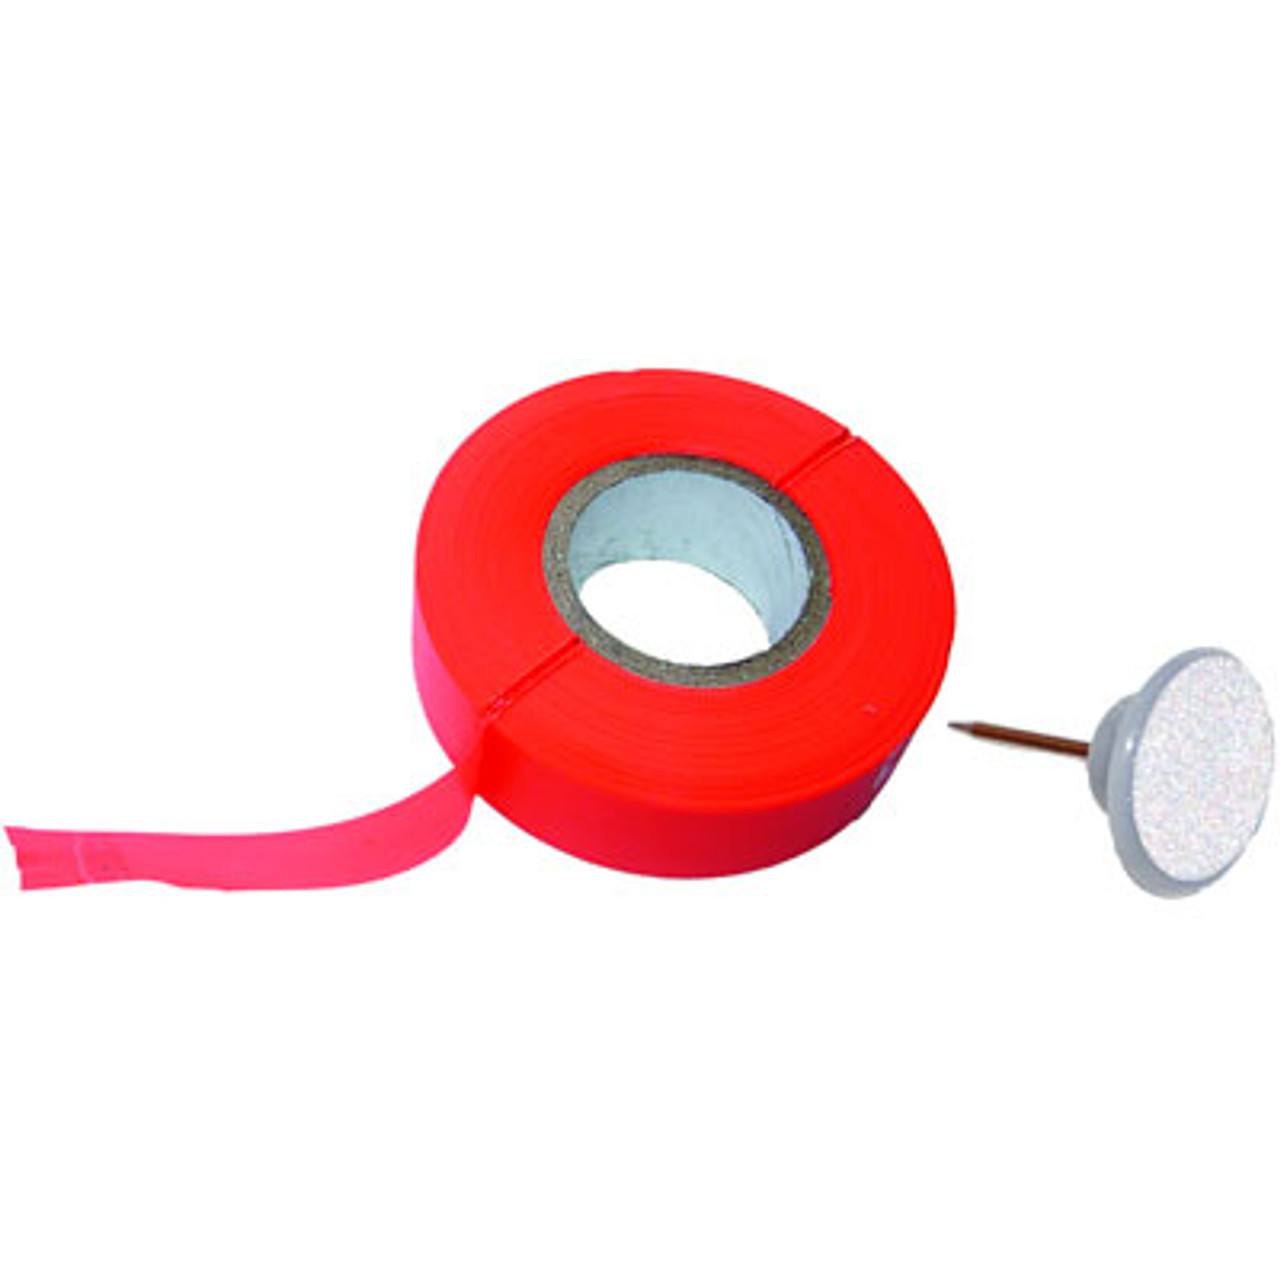 Trail-Marking Ribbon with Reflective Tacks by HME Products